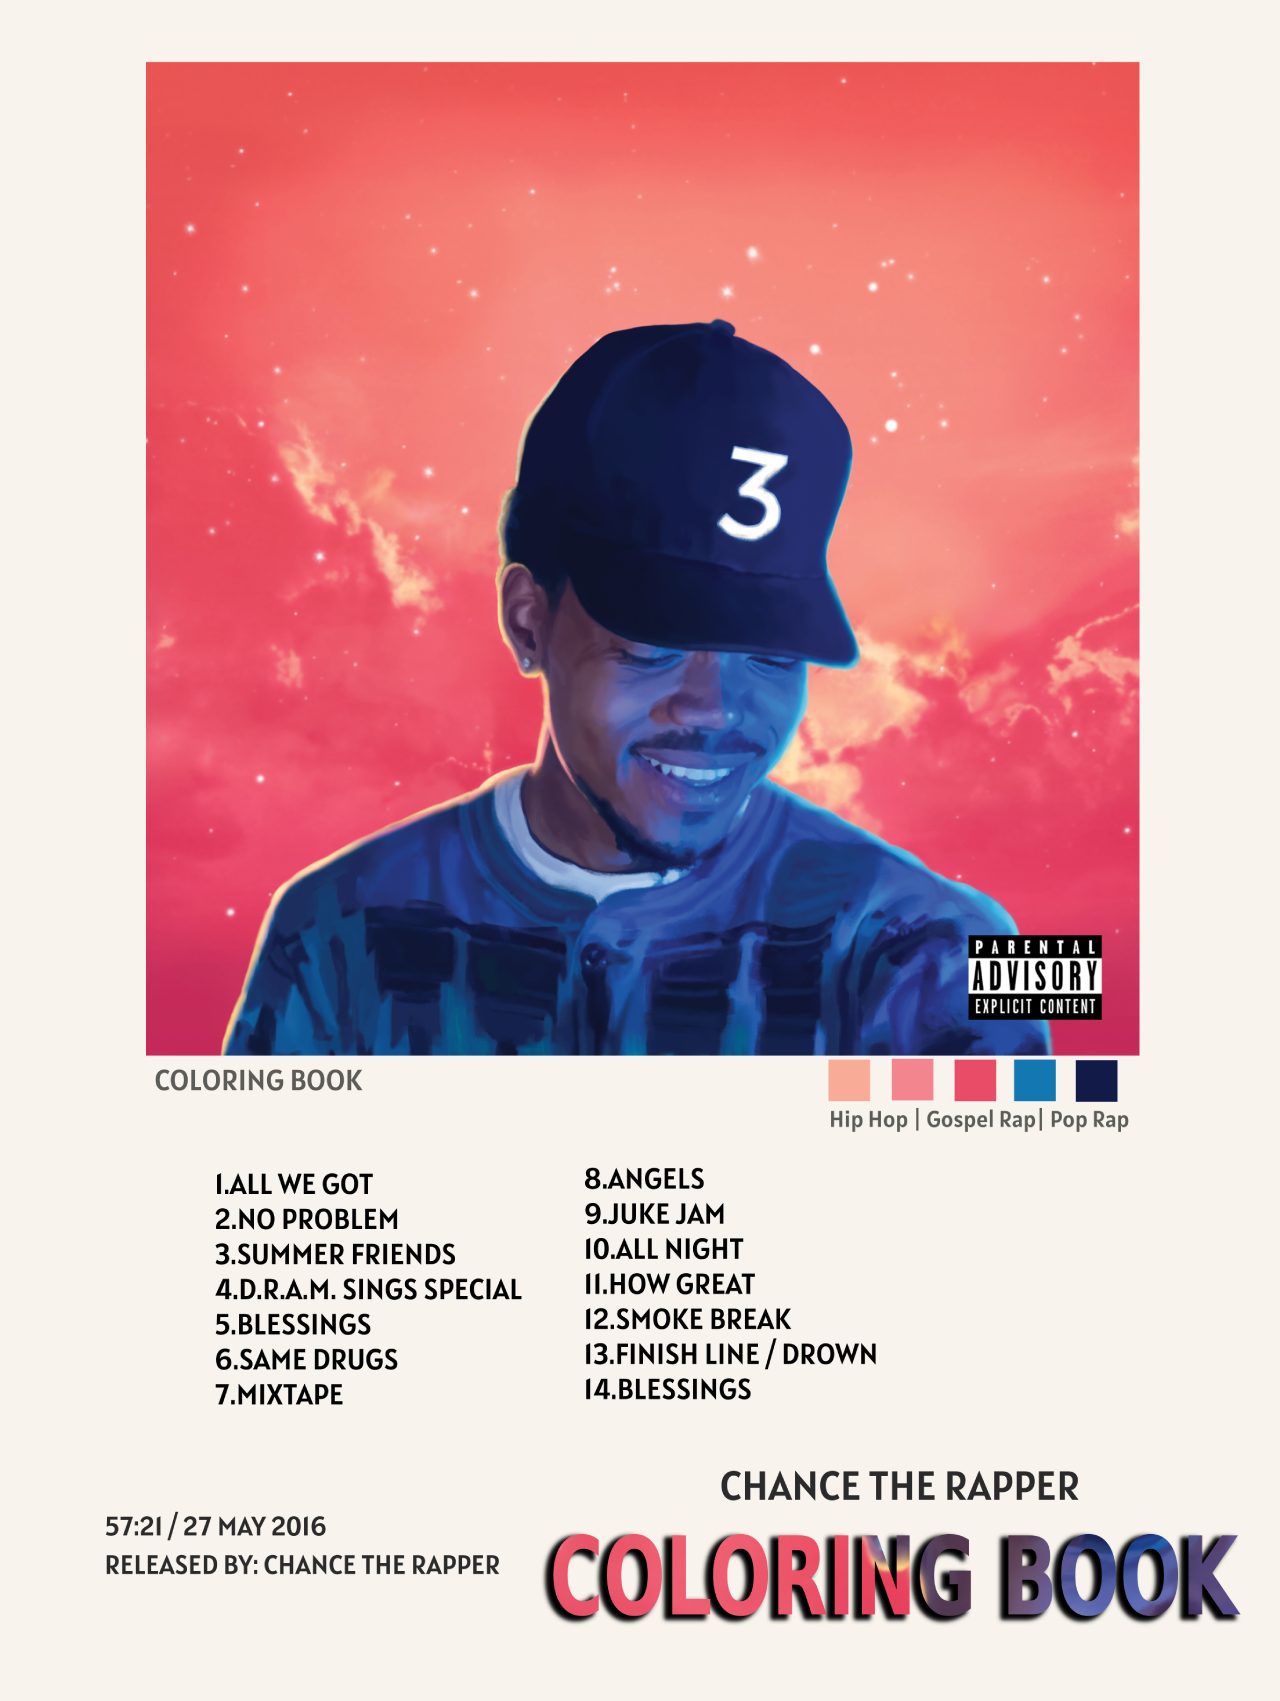 CHANCE THE RAPPER - COLORING BOOK – CulturedPrint